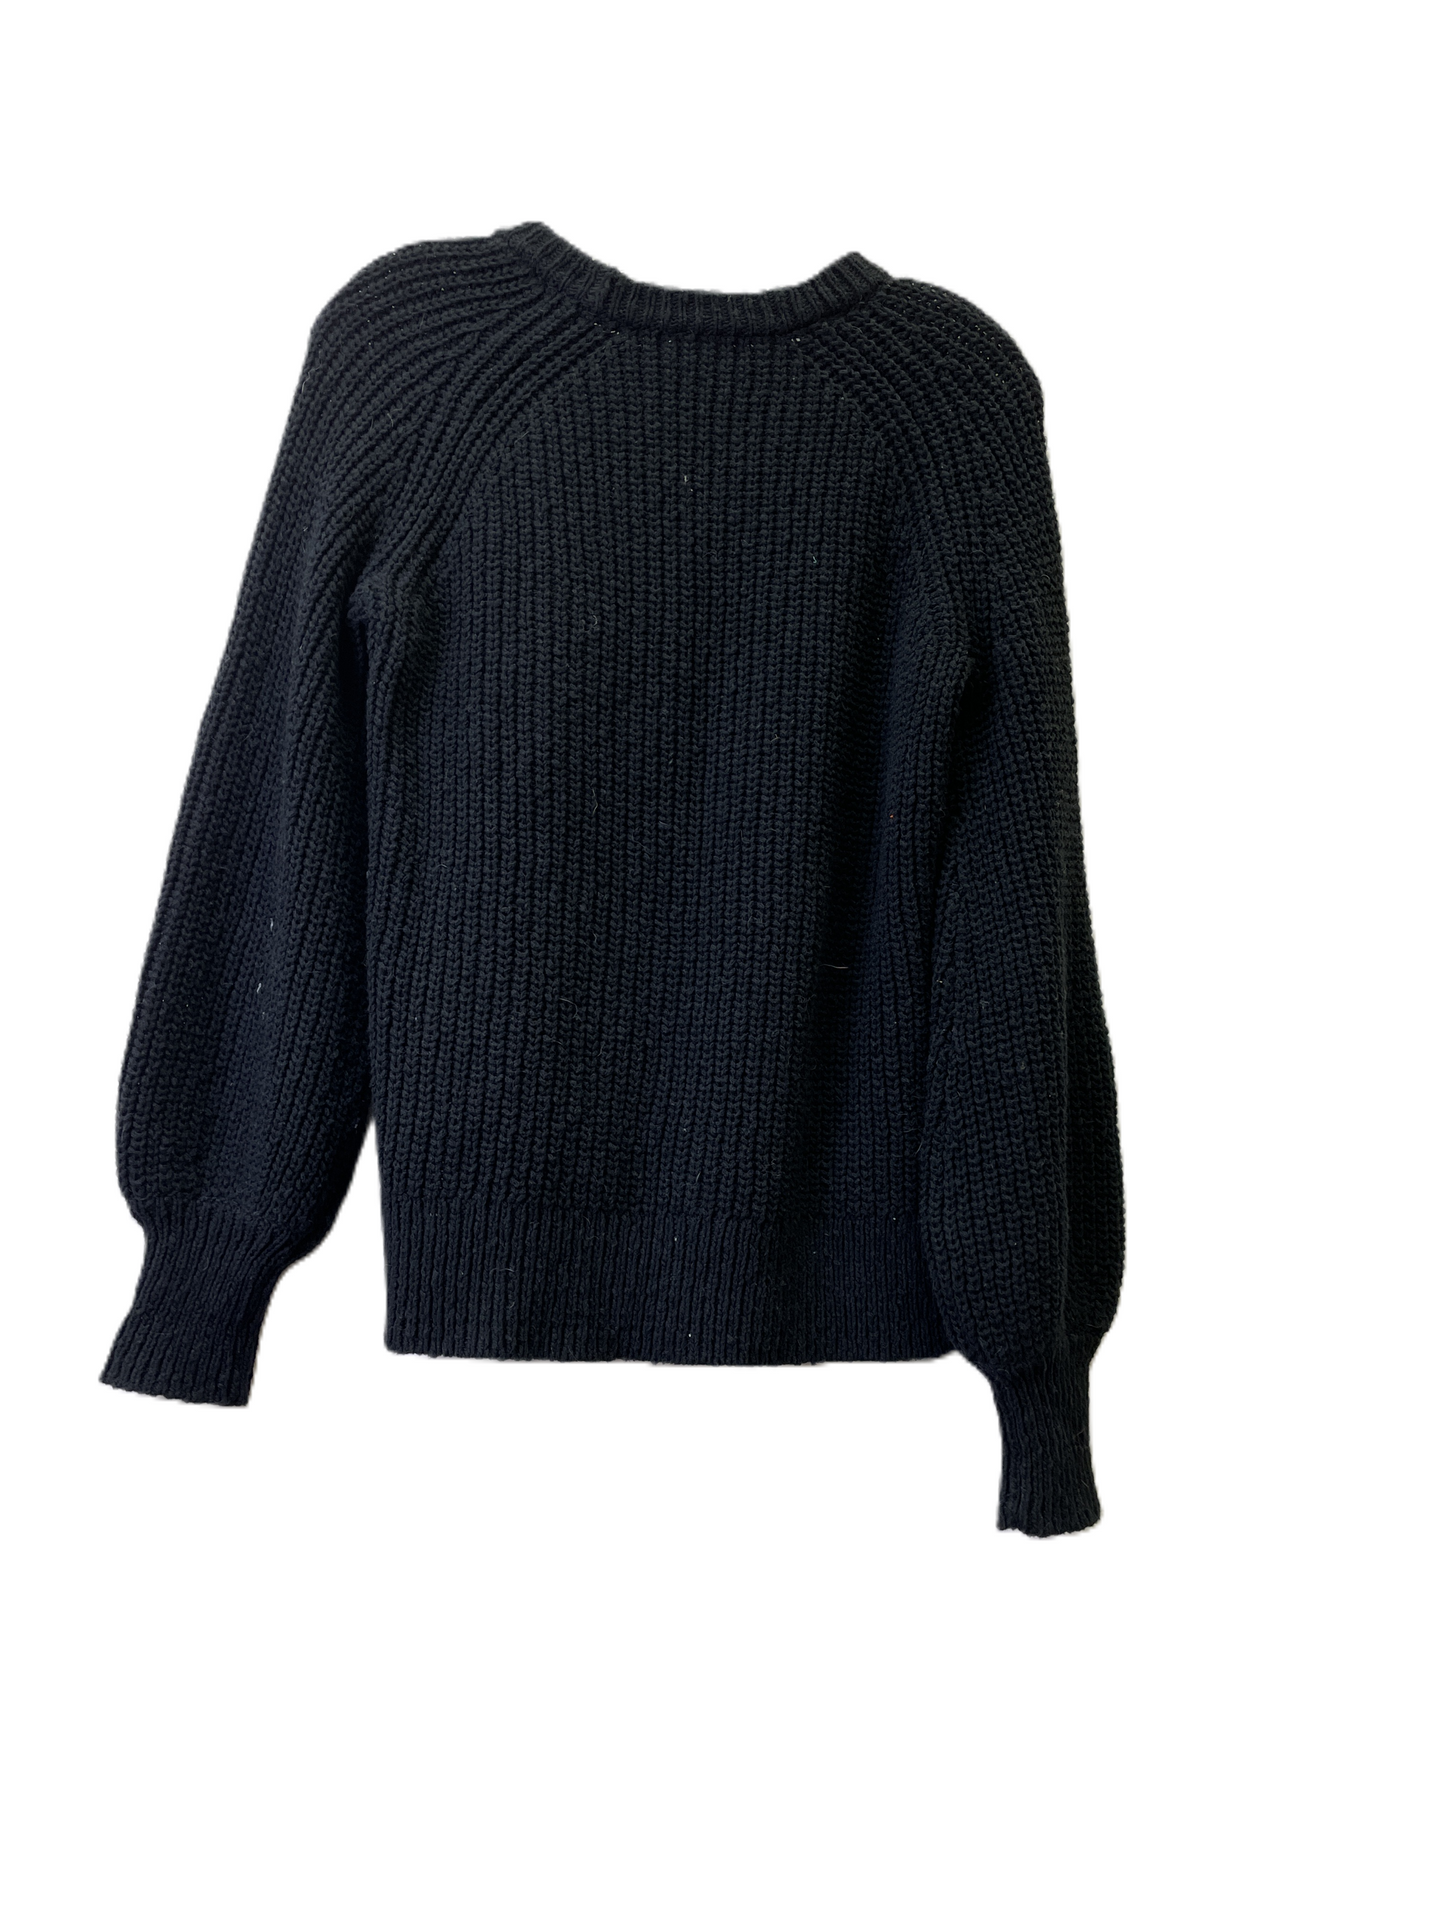 Black Sweater By Madewell, Size: Xs